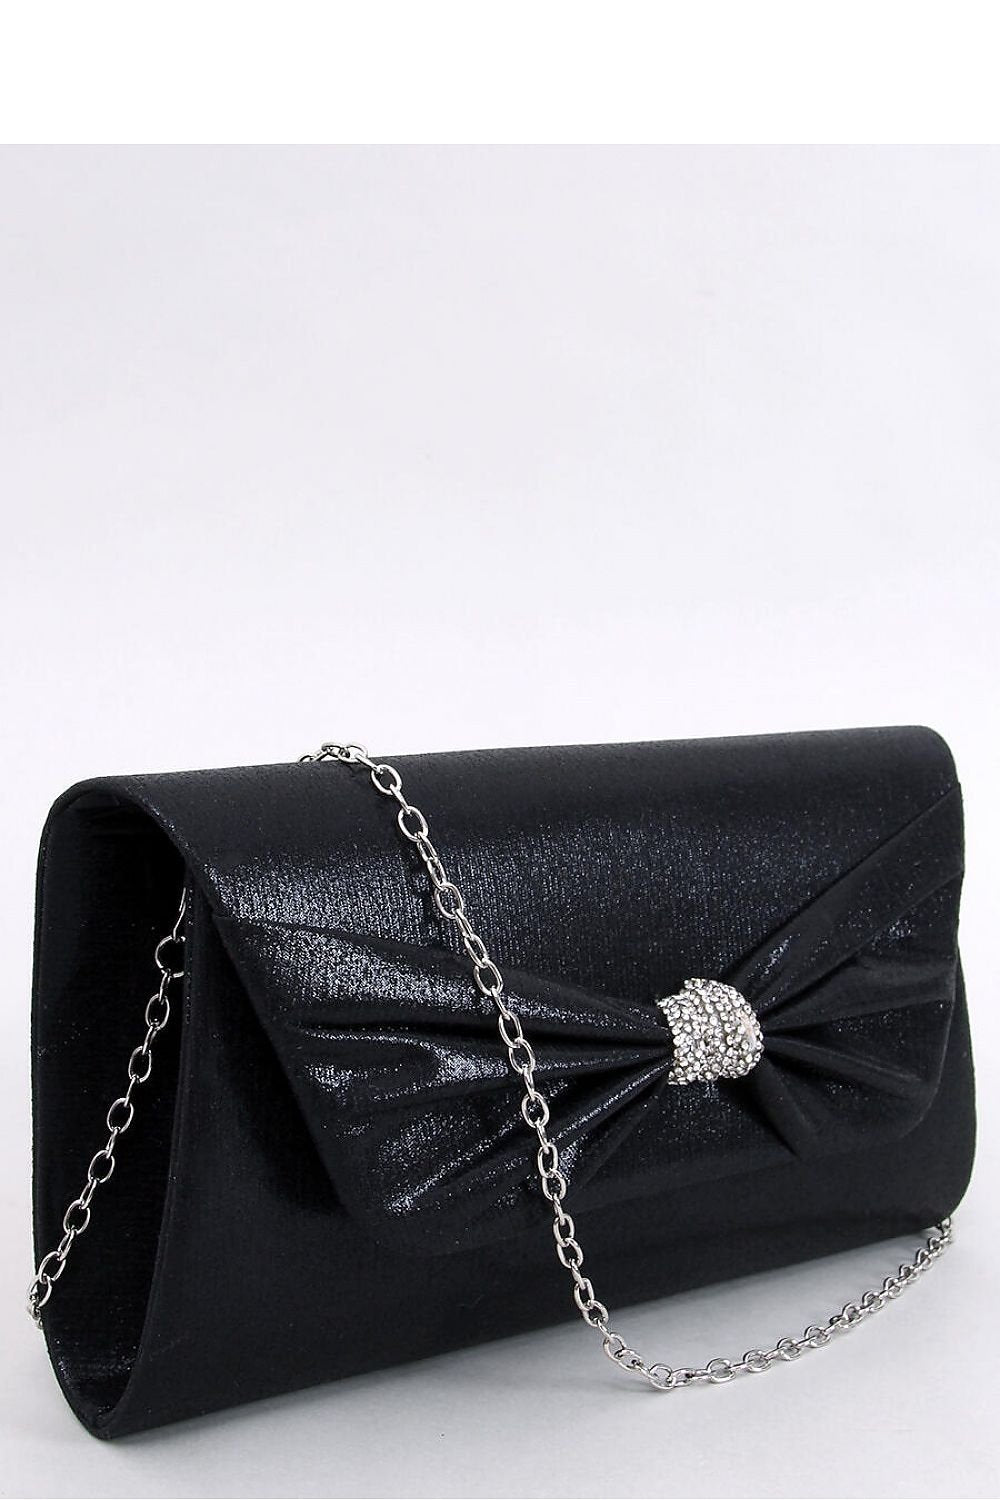 Envelope clutch bag - M&H FashionEnvelope clutch bagM&H FashionM&H Fashion192446_1116838one-size-fits-allEnvelope clutch bag InelloM&H FashionM&H FashionIridescent clutch bag for women. It can be worn in two ways ? classically in hand or on a delicate silver-colored chain. It fastens with a magnetic clasp, and insideEnvelope clutch bag